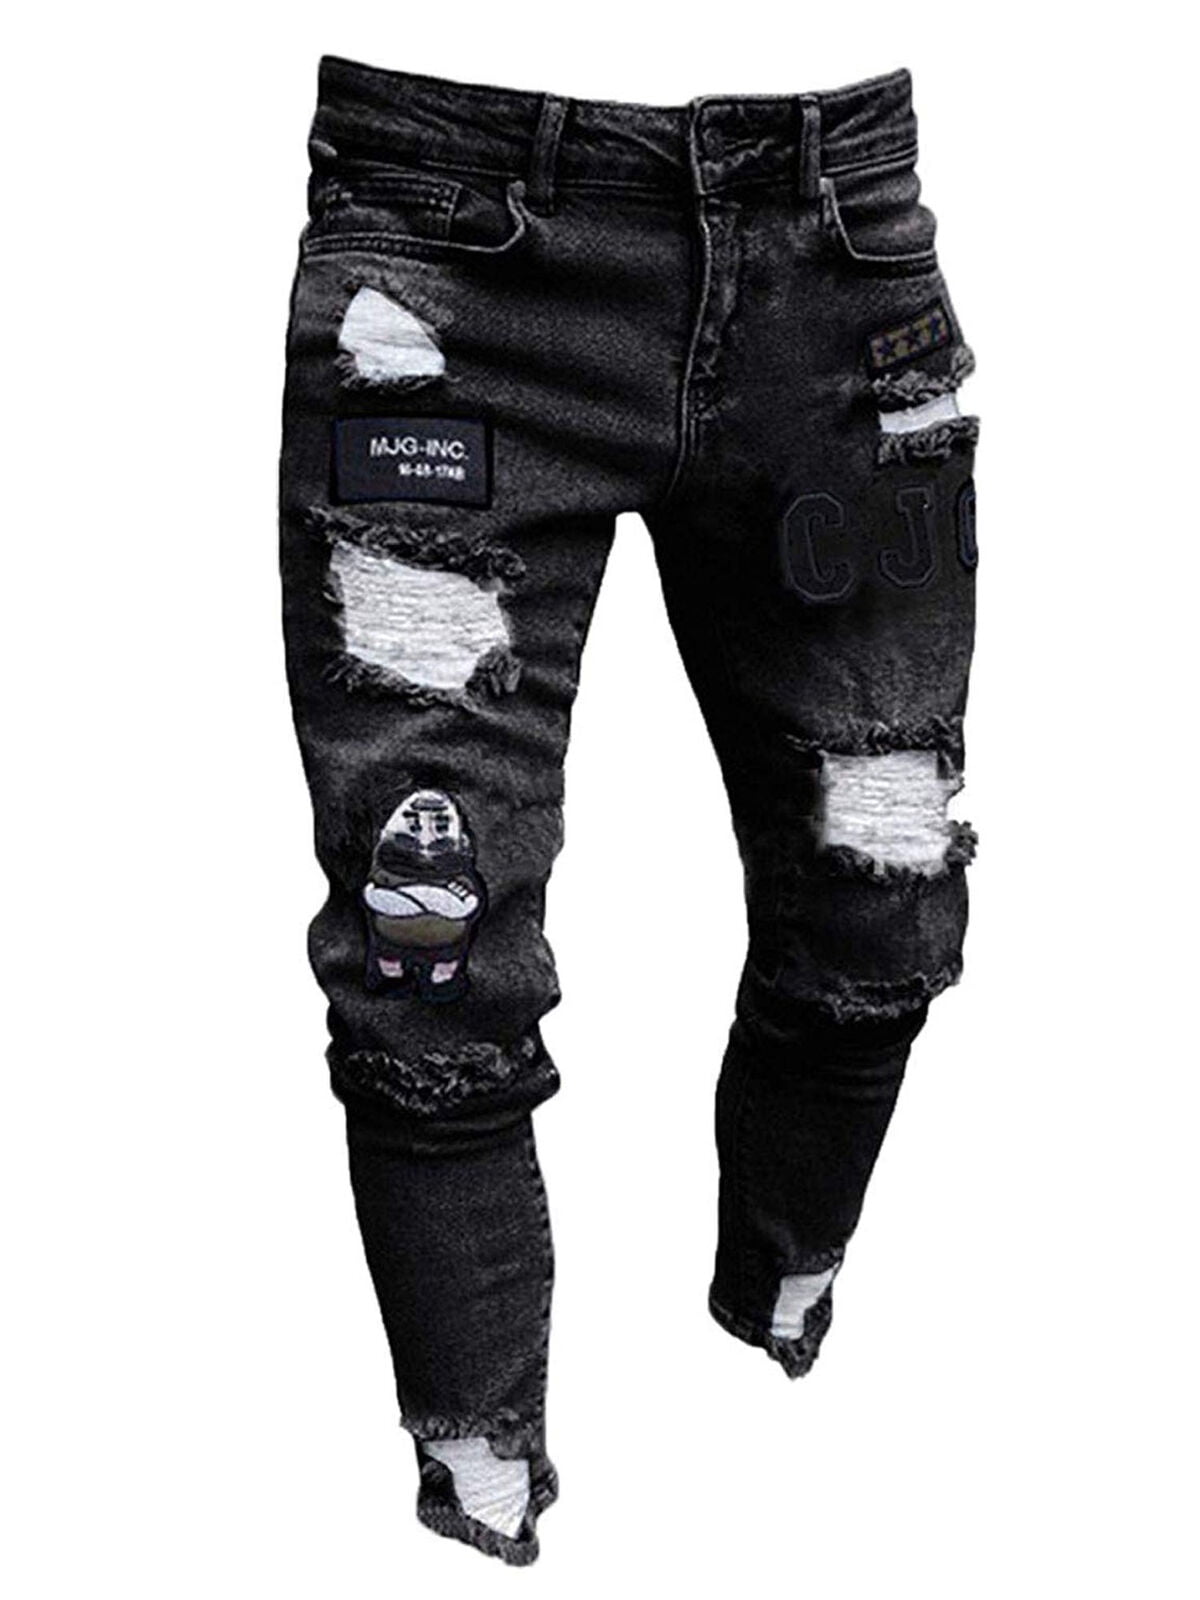 New Mens Skinny Jeans Super Stretch Ripped Style Denim Pants Trousers 